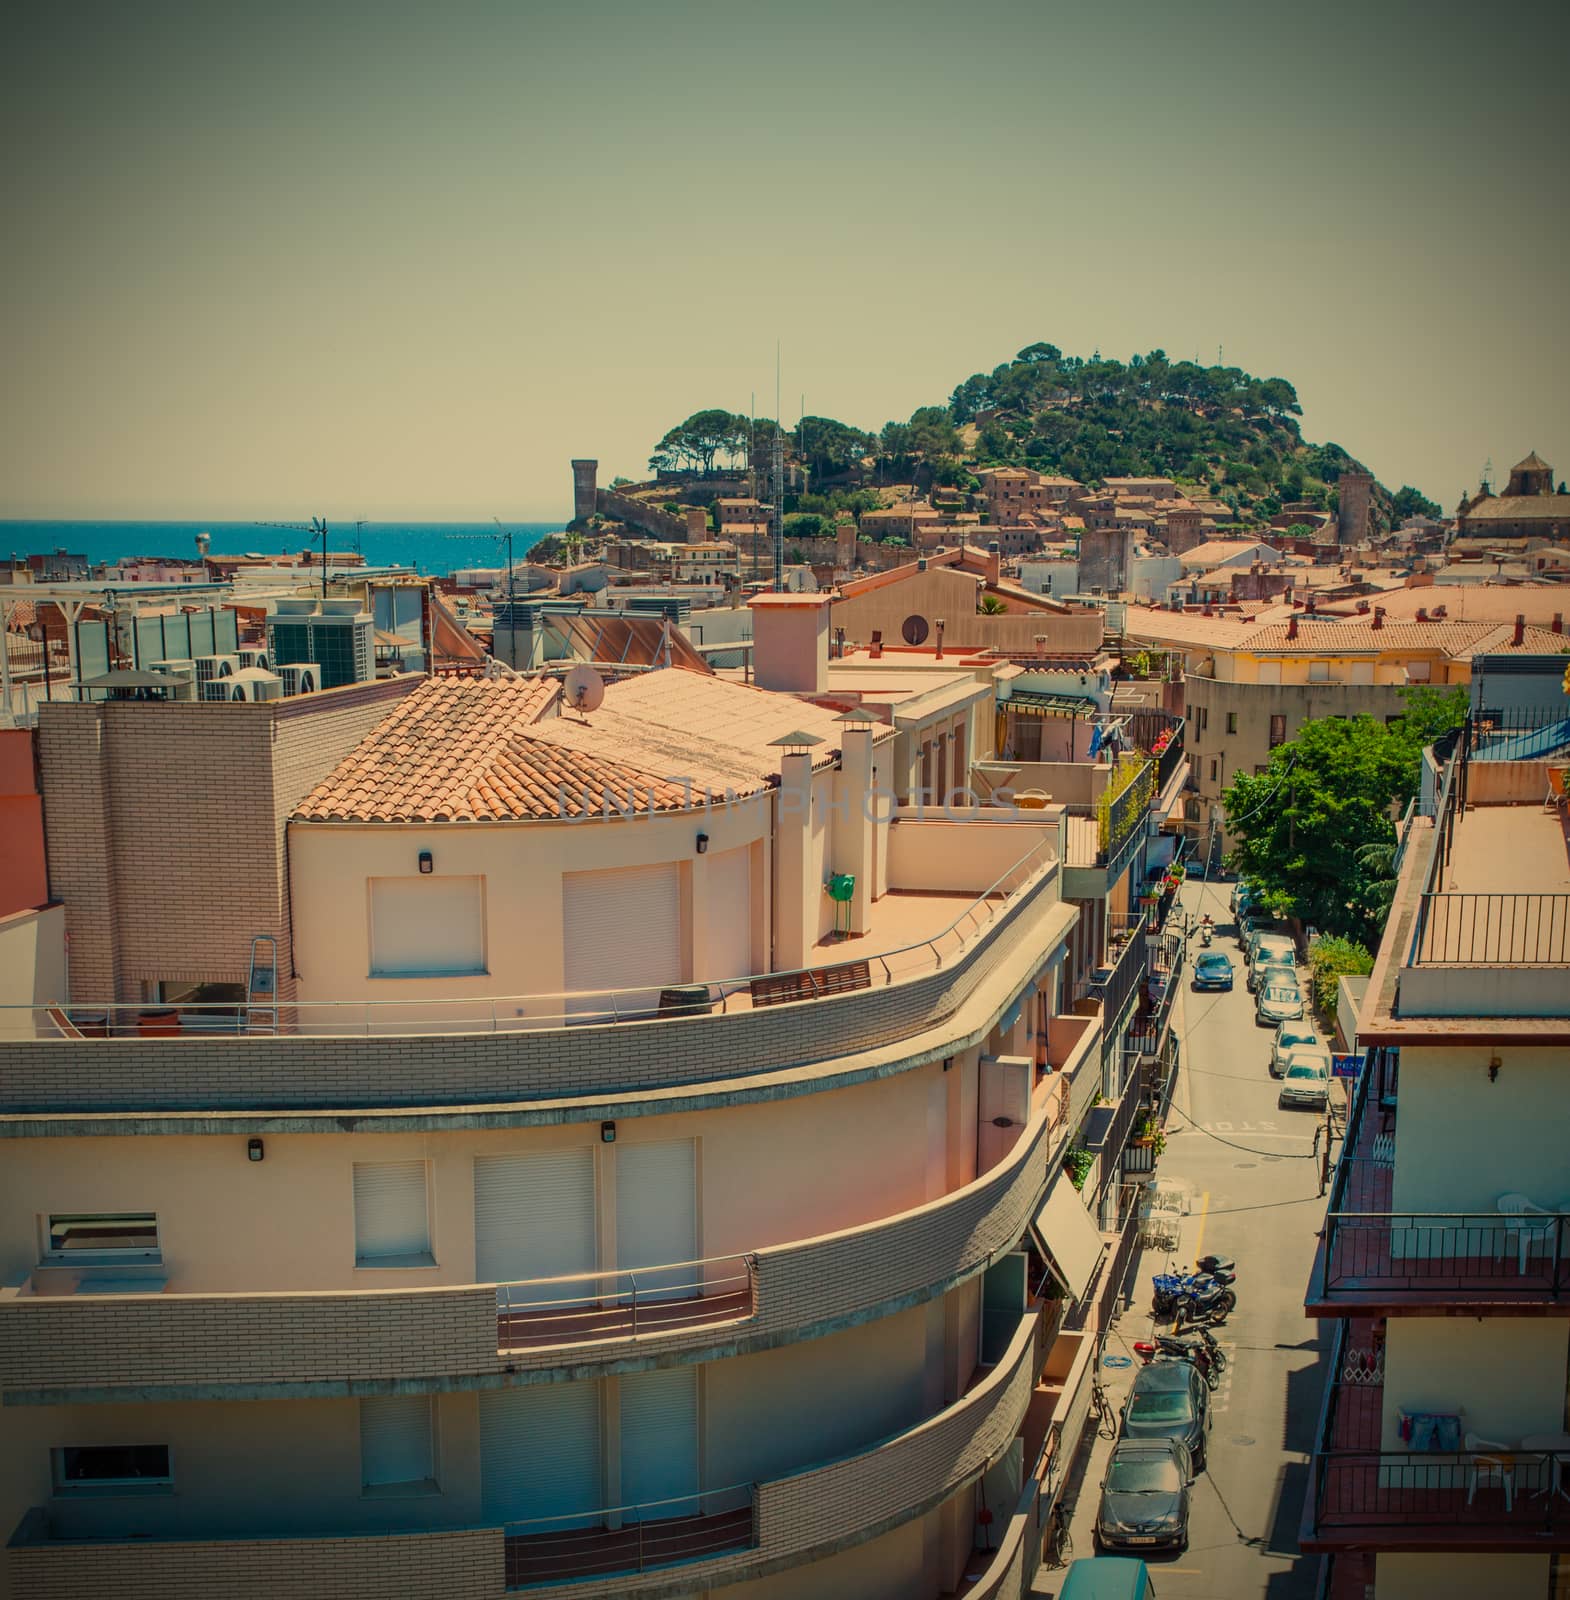 Spain, Catalunya, Tossa de Mar, 06.20.2013, the panorama of the town with the Carrer Tomas Barber street and the Mediterranean Sea with the old medieval fortress Villa Vella, instagram style filter, editorial use only